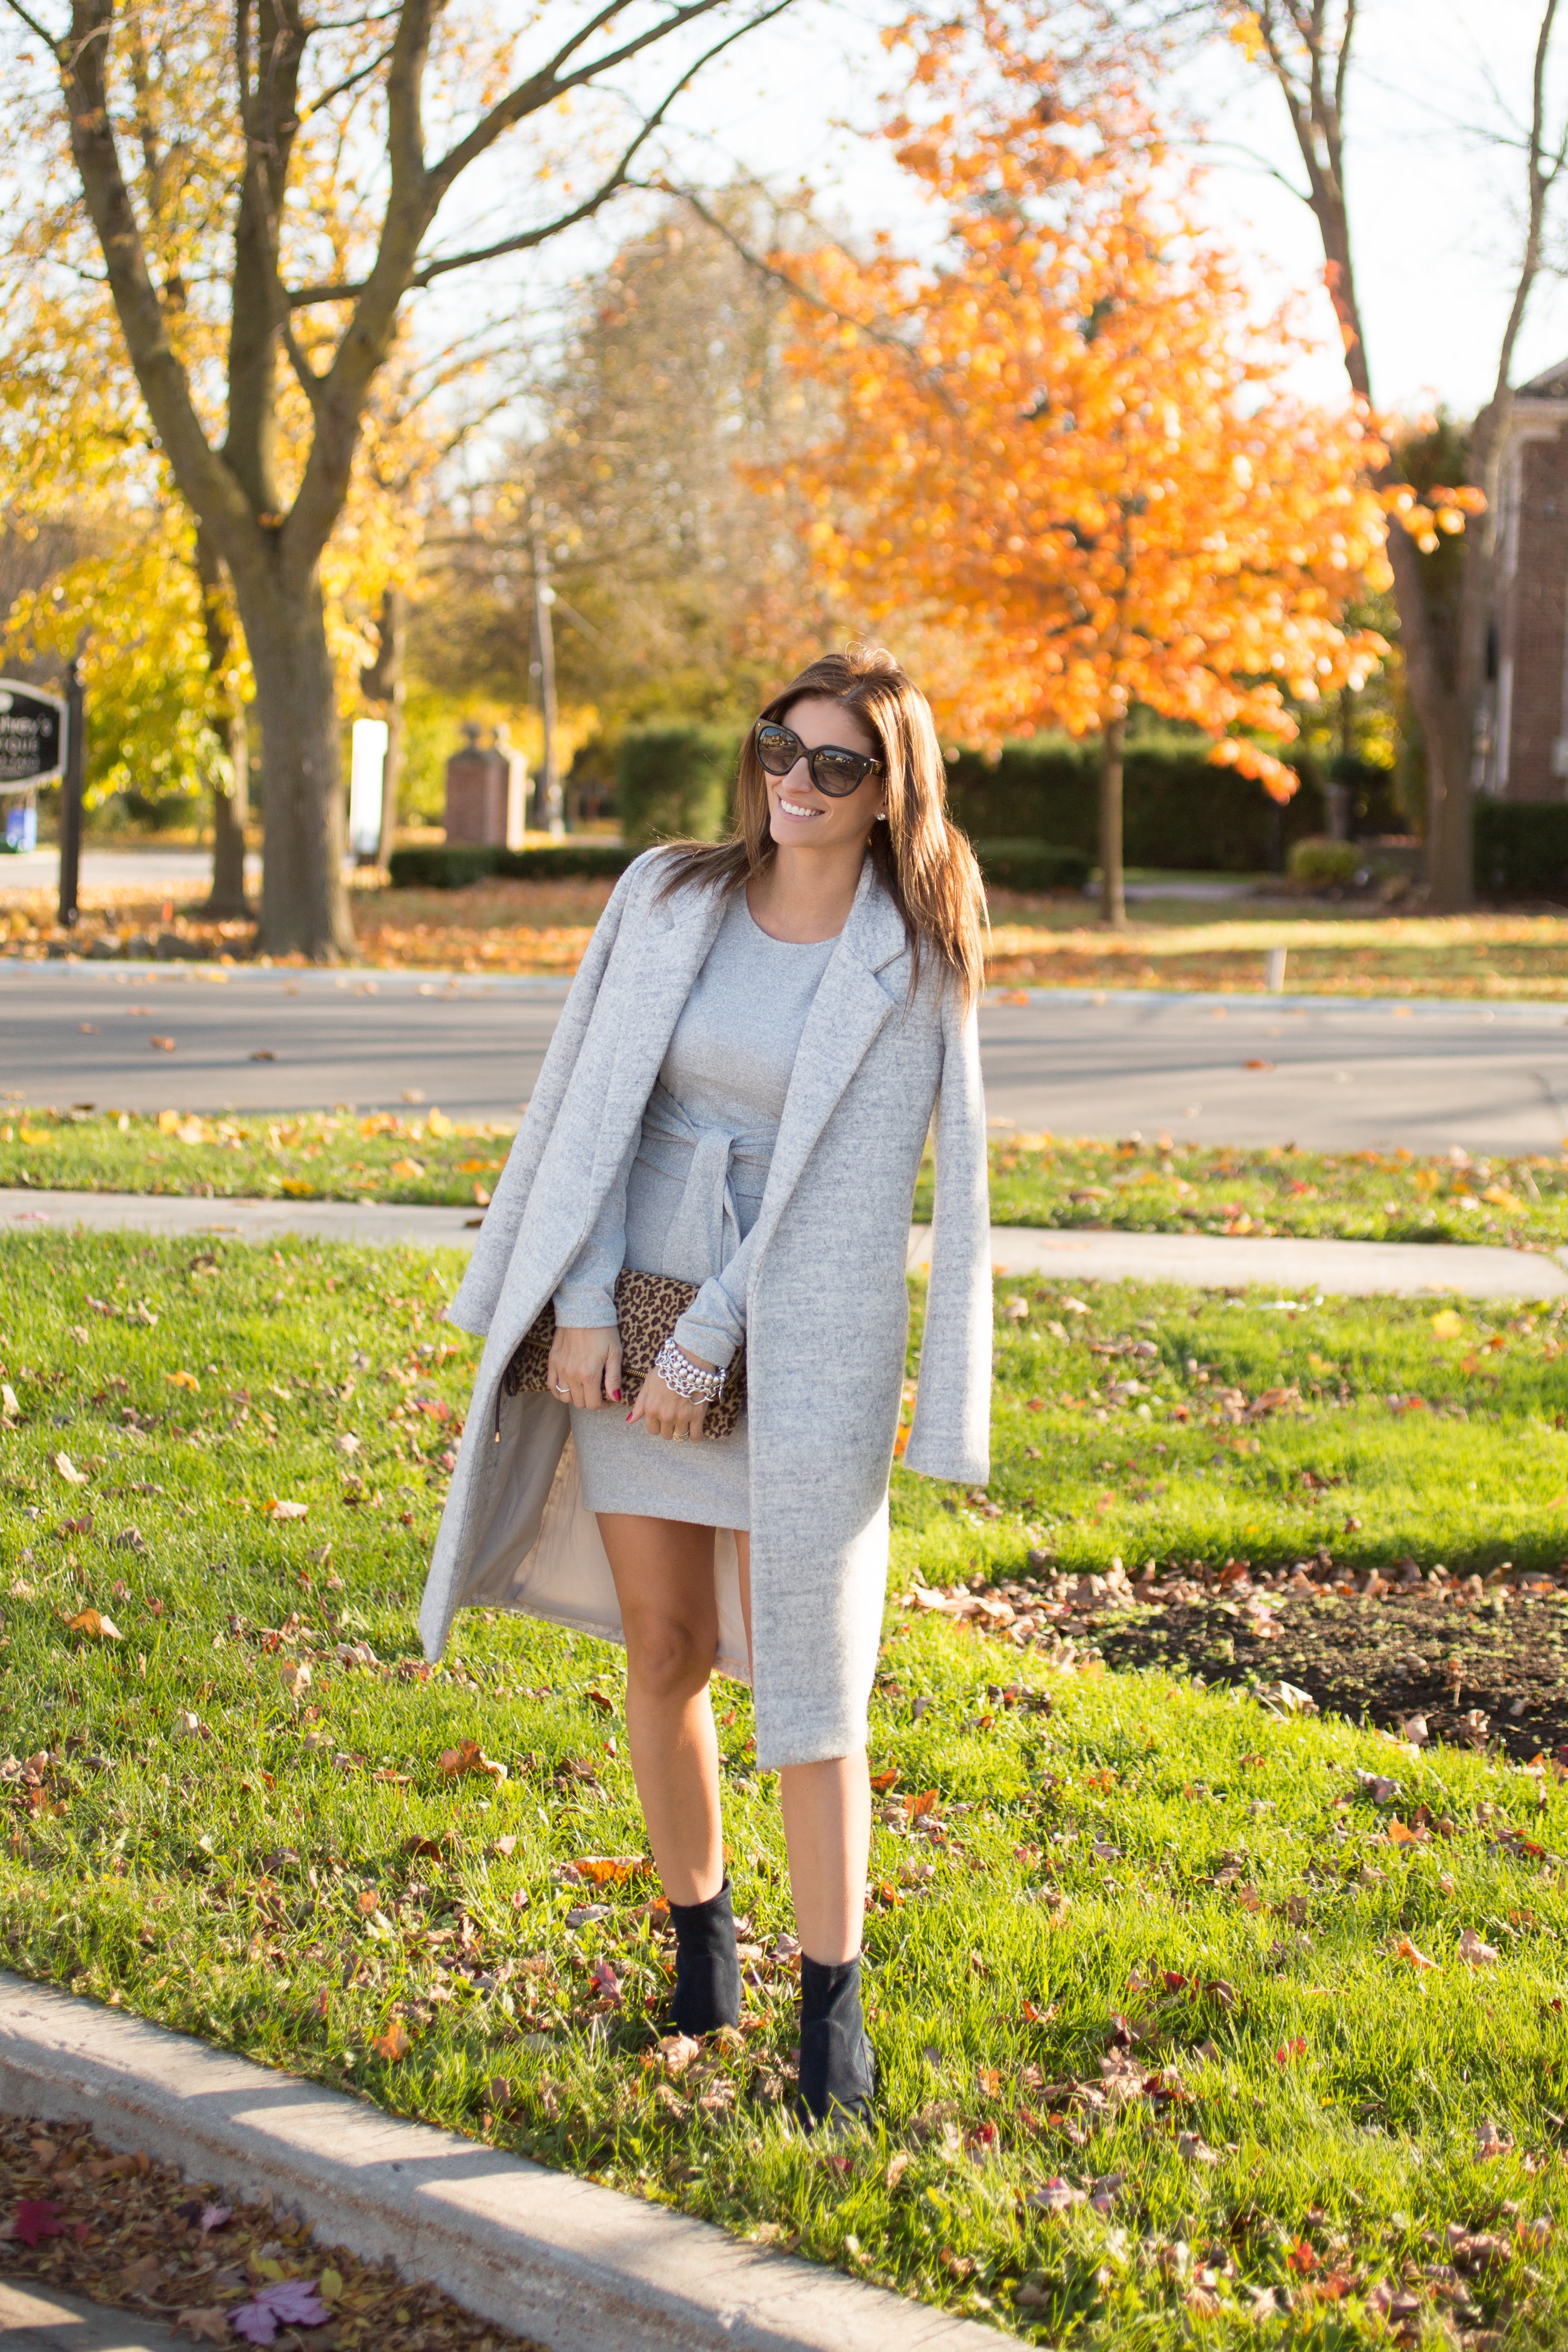 Grey sweater dress from Dynamite, grey long coat, leopard bag, black pointed toe sock boots